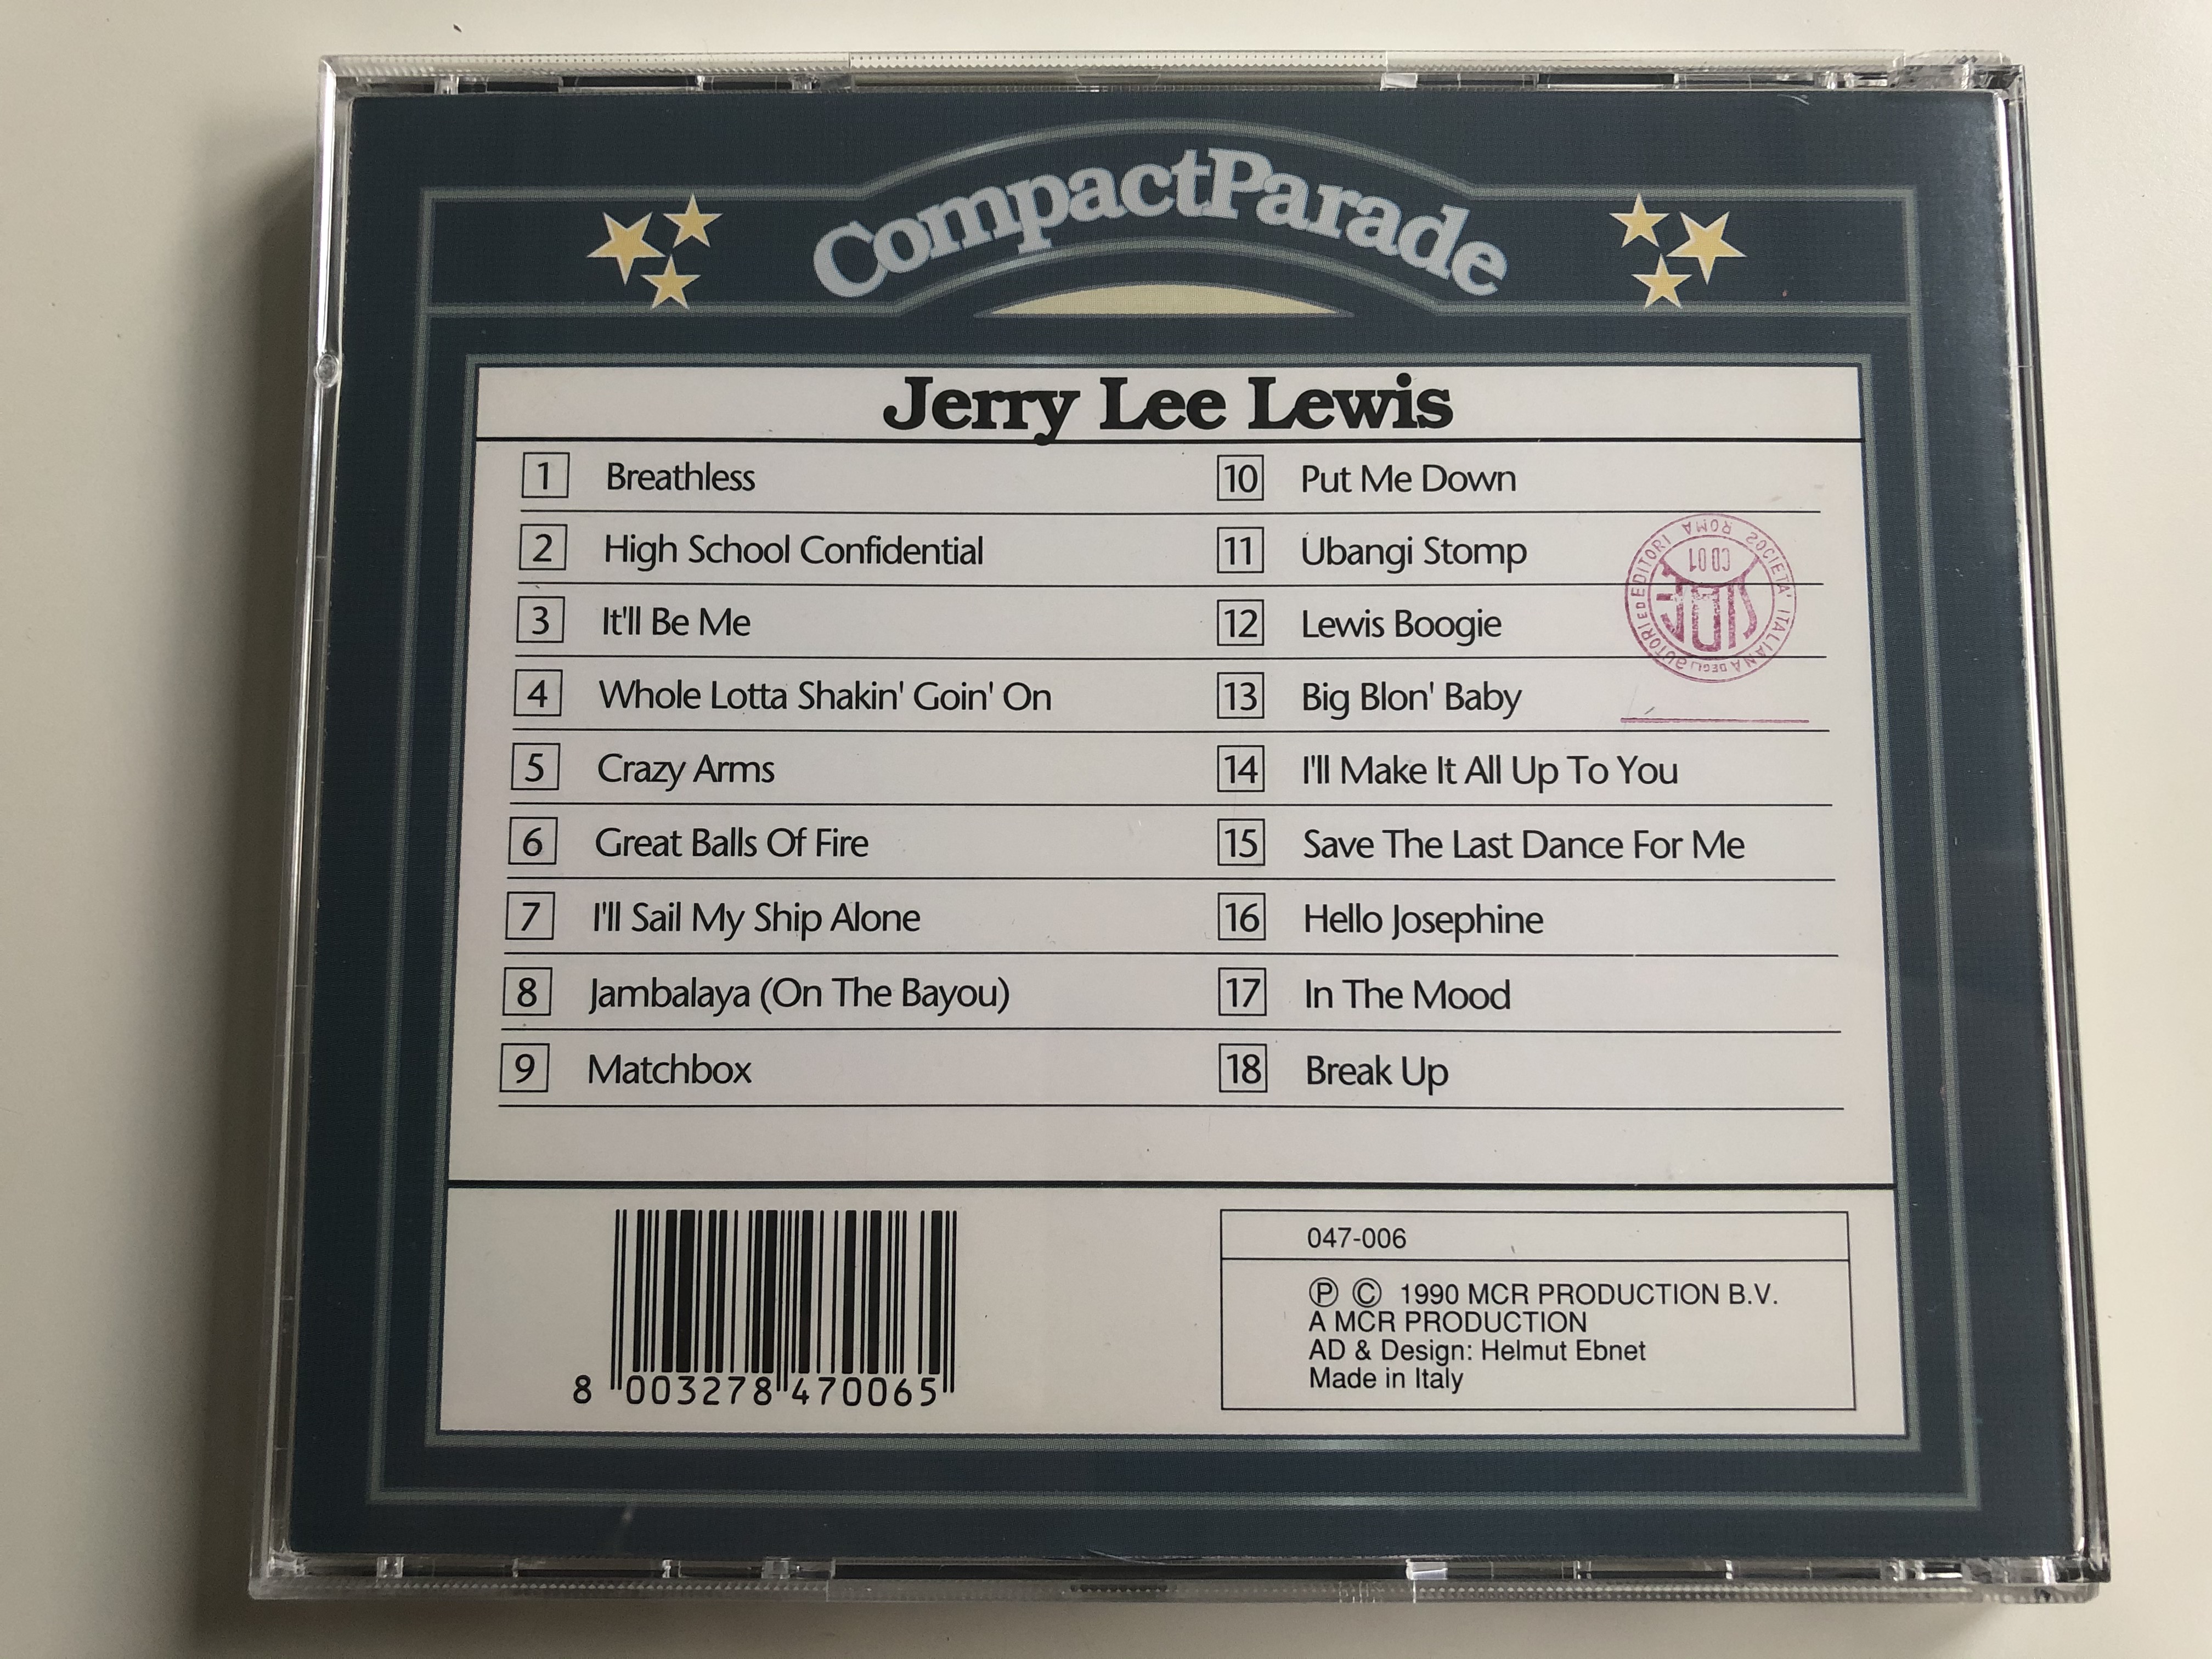 compact-parade-jerry-lee-lewis-m.c.r.-productions-b.v.-audio-cd-1990-047-006-4-.jpg